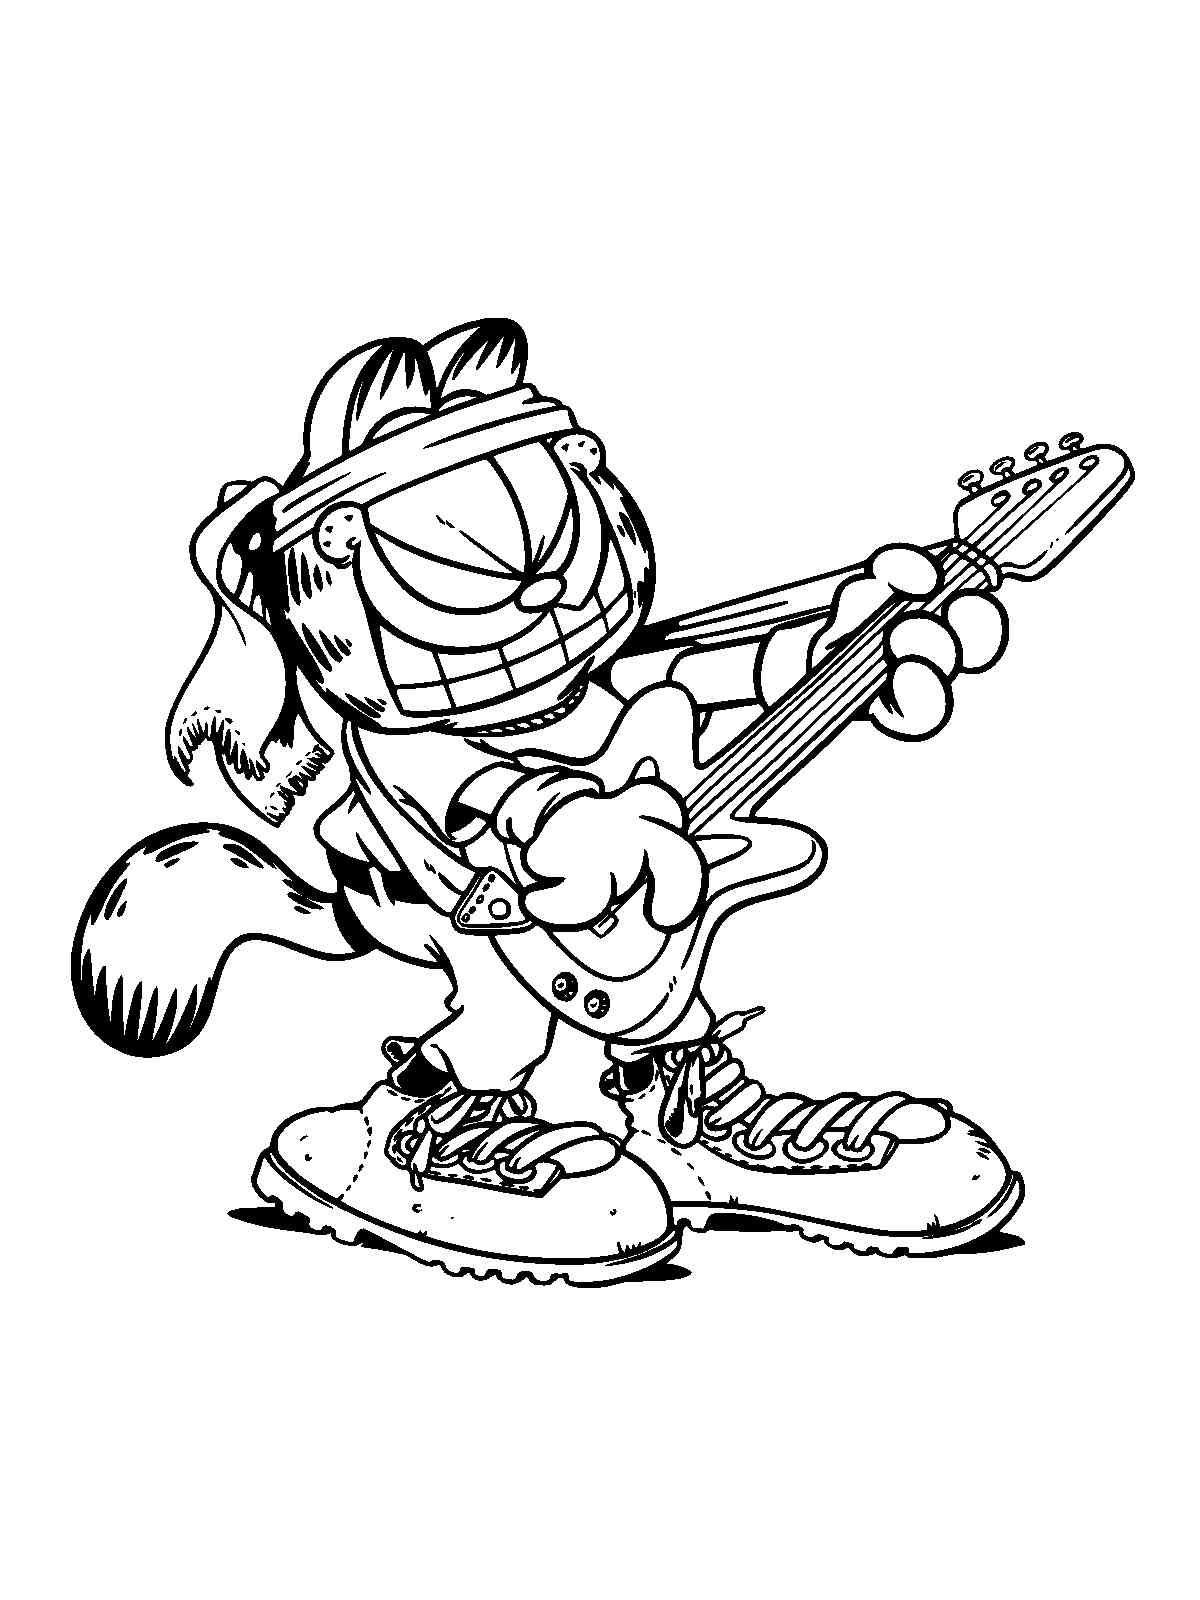 Garfield 6 coloring page